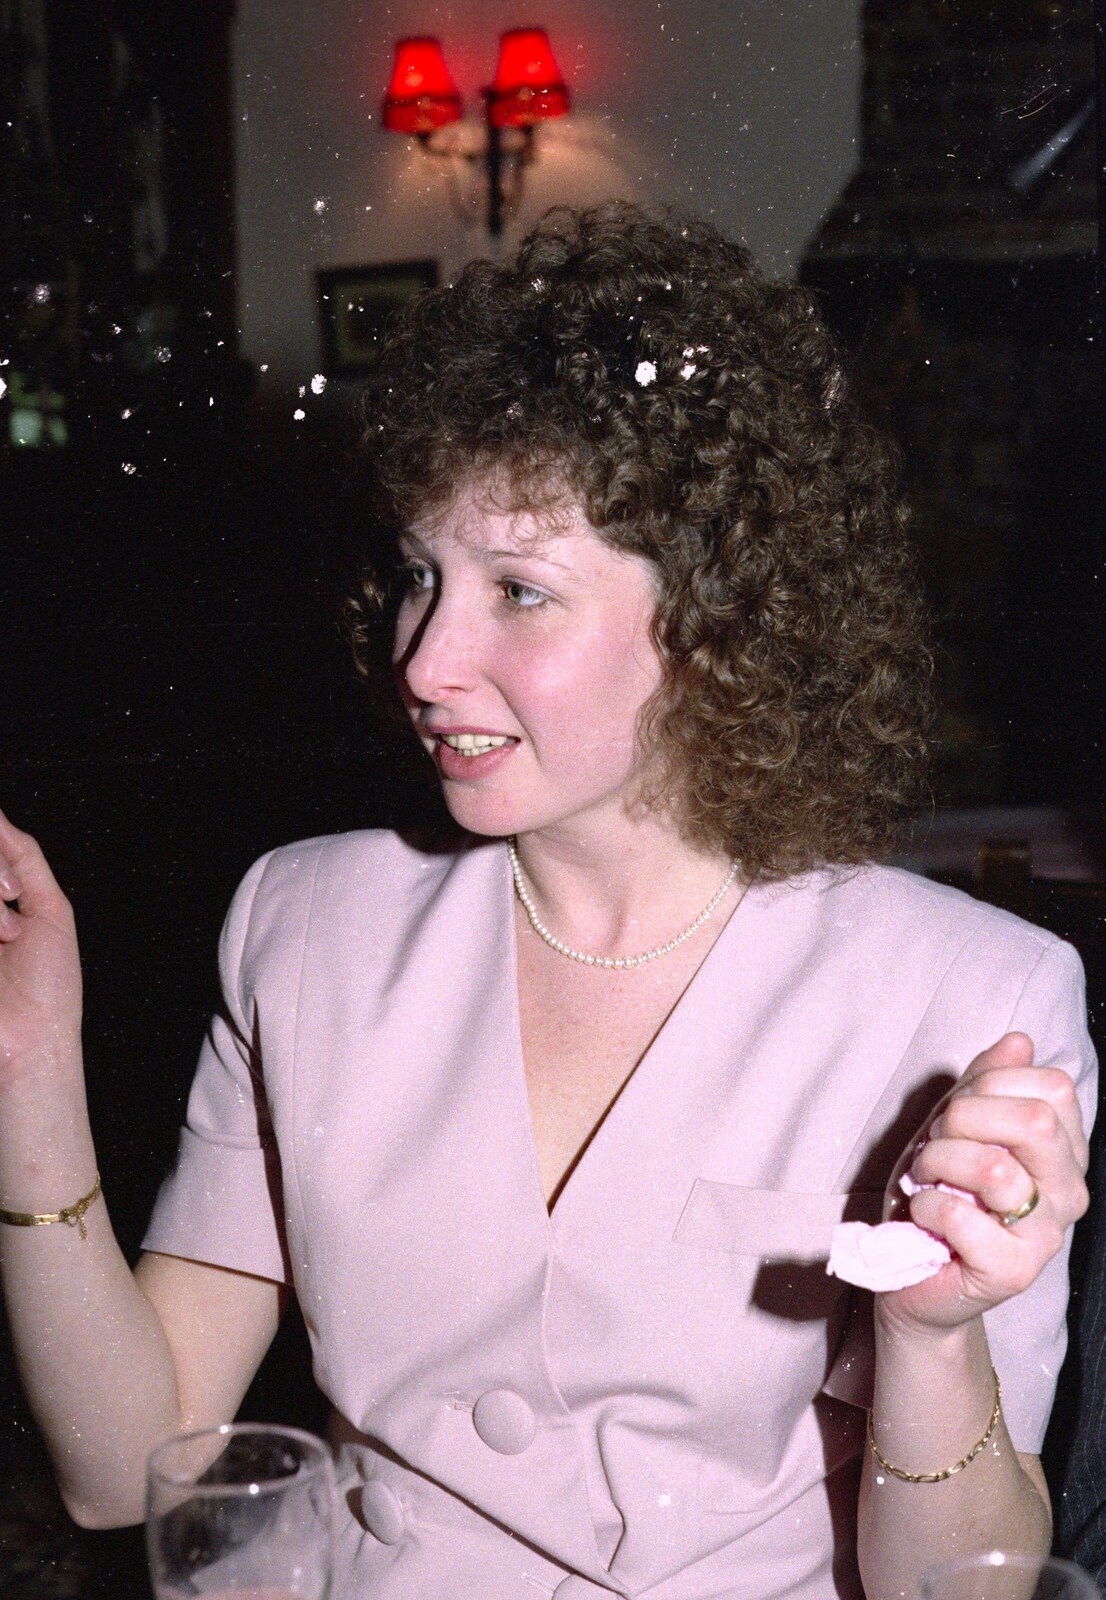 Allison in the White Horse from Bonfire Night and Printec at the Stoke Ash White Horse, Suffolk - 5th November 1991